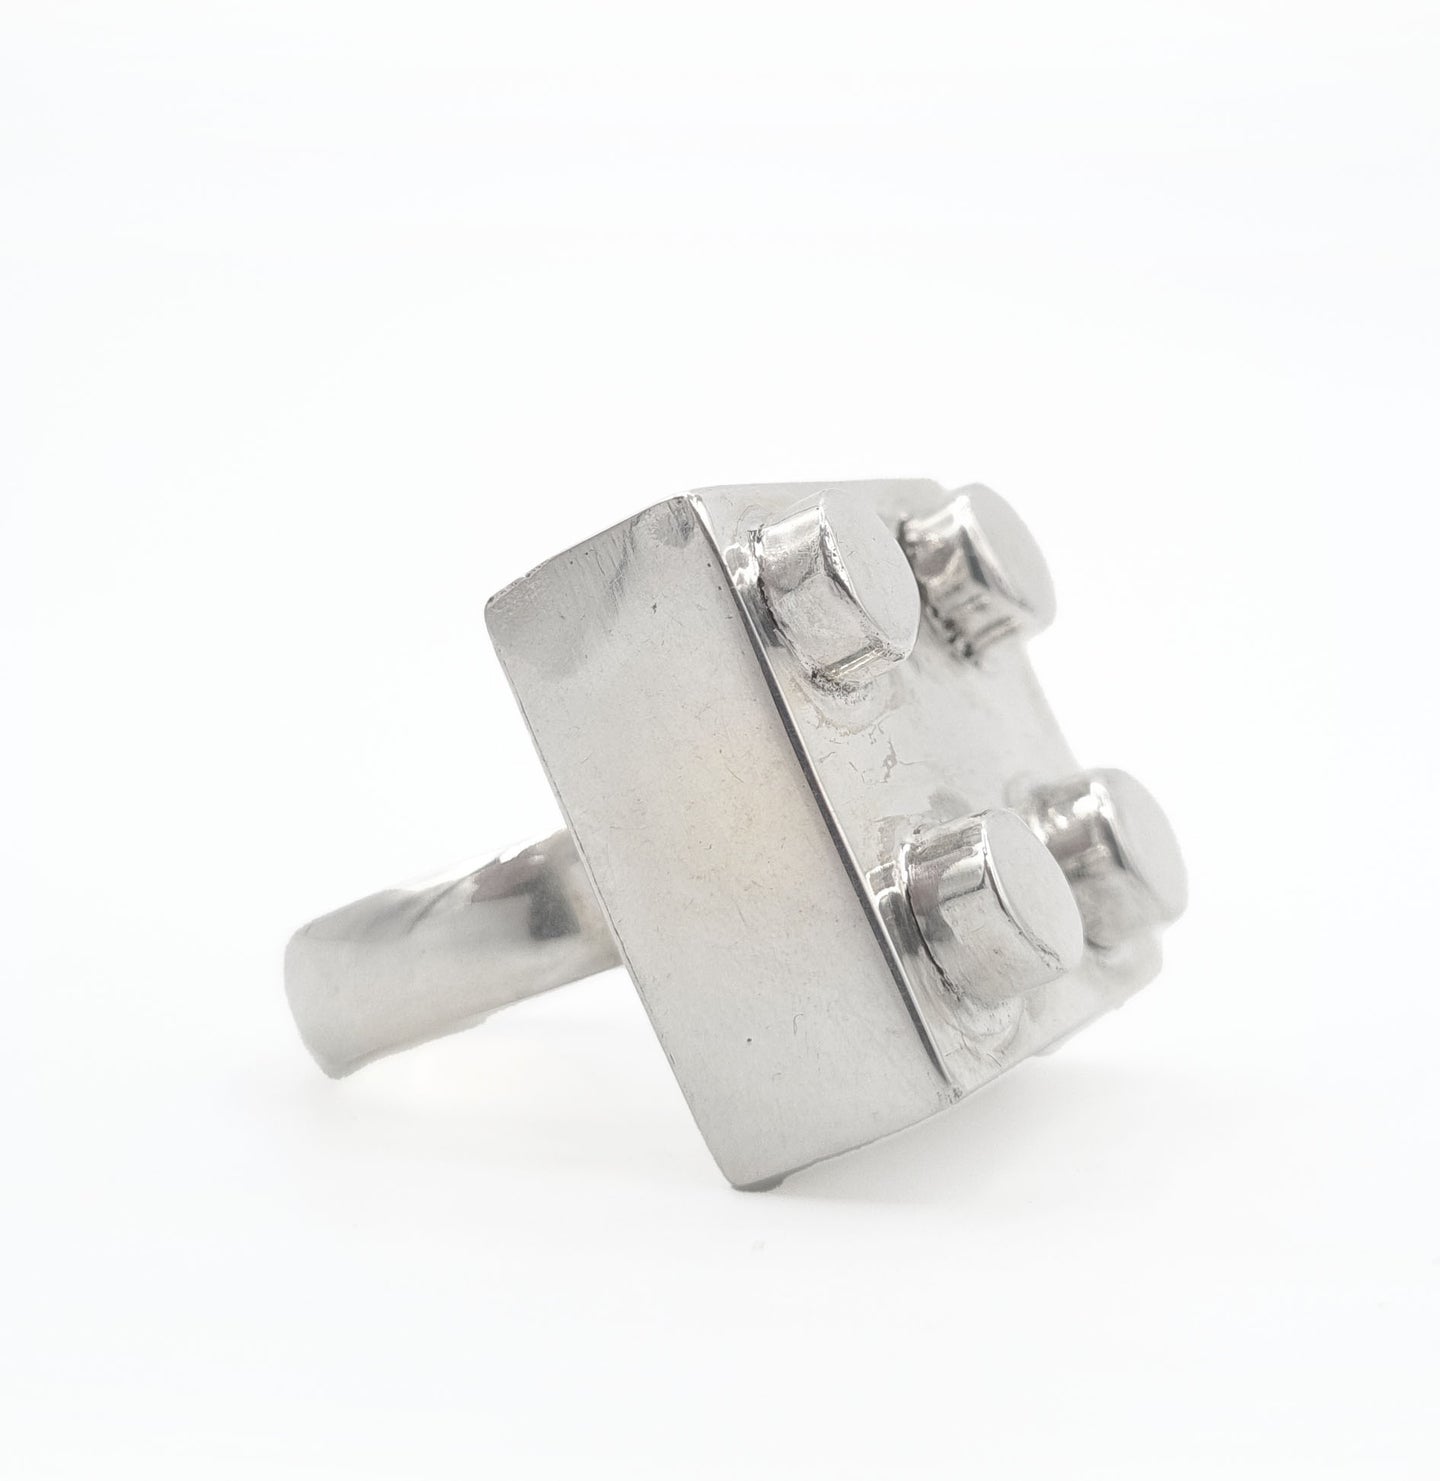 DUPLO ring in Silver